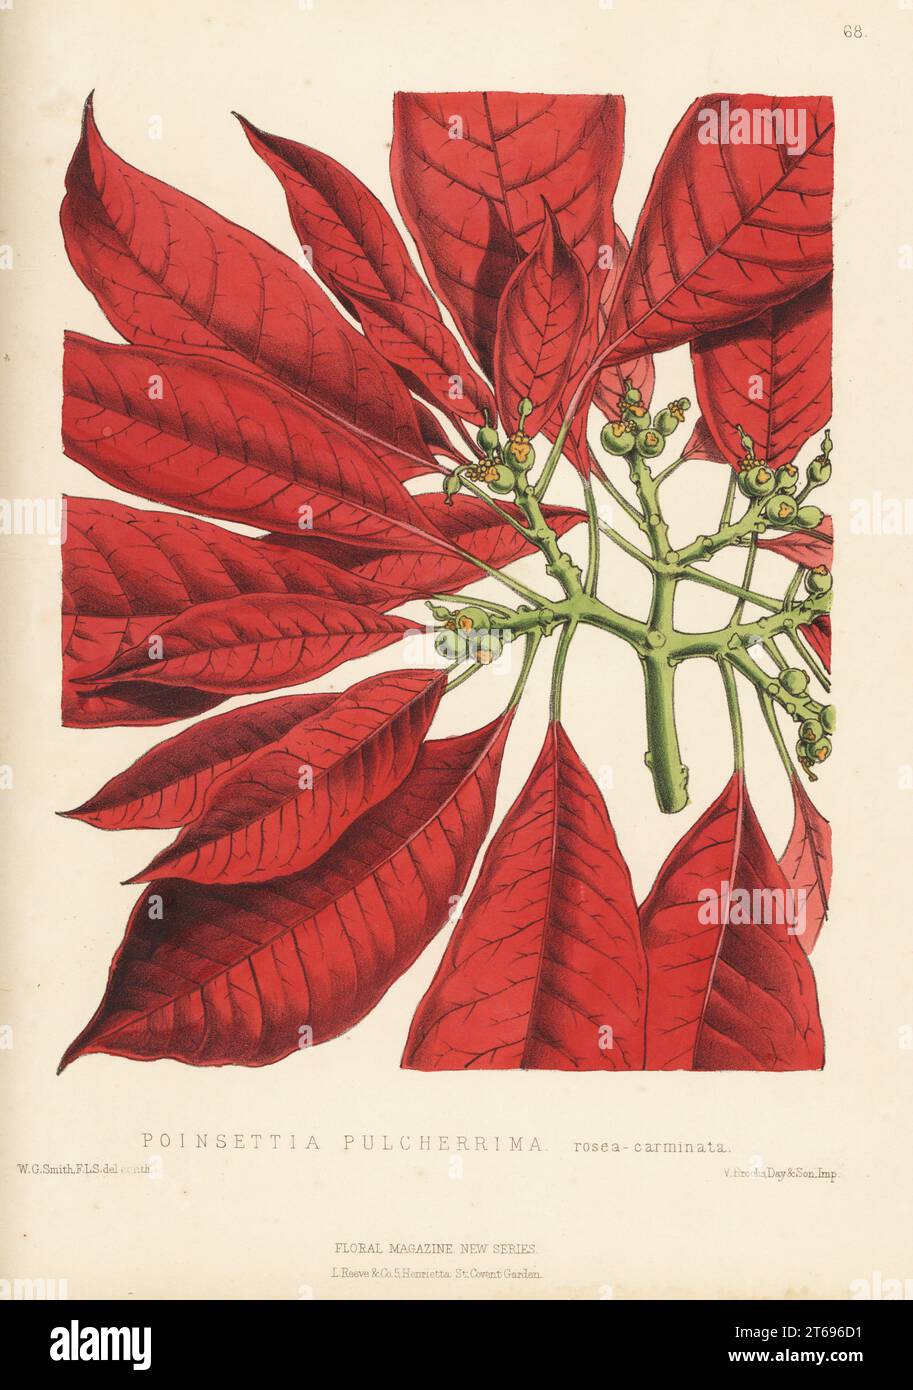 Poinsettia, Euphorbia pulcherrima. As Poinsettia pulcherrima rosea-carminata, from William Bull's nursery, King's Road, Chelsea. Handcolored botanical illustration drawn and lithographed by Worthington George Smith from Henry Honywood Dombrain's Floral Magazine, New Series, Volume 2, L. Reeve, London, 1873. Lithograph printed by Vincent Brooks, Day & Son. Stock Photo